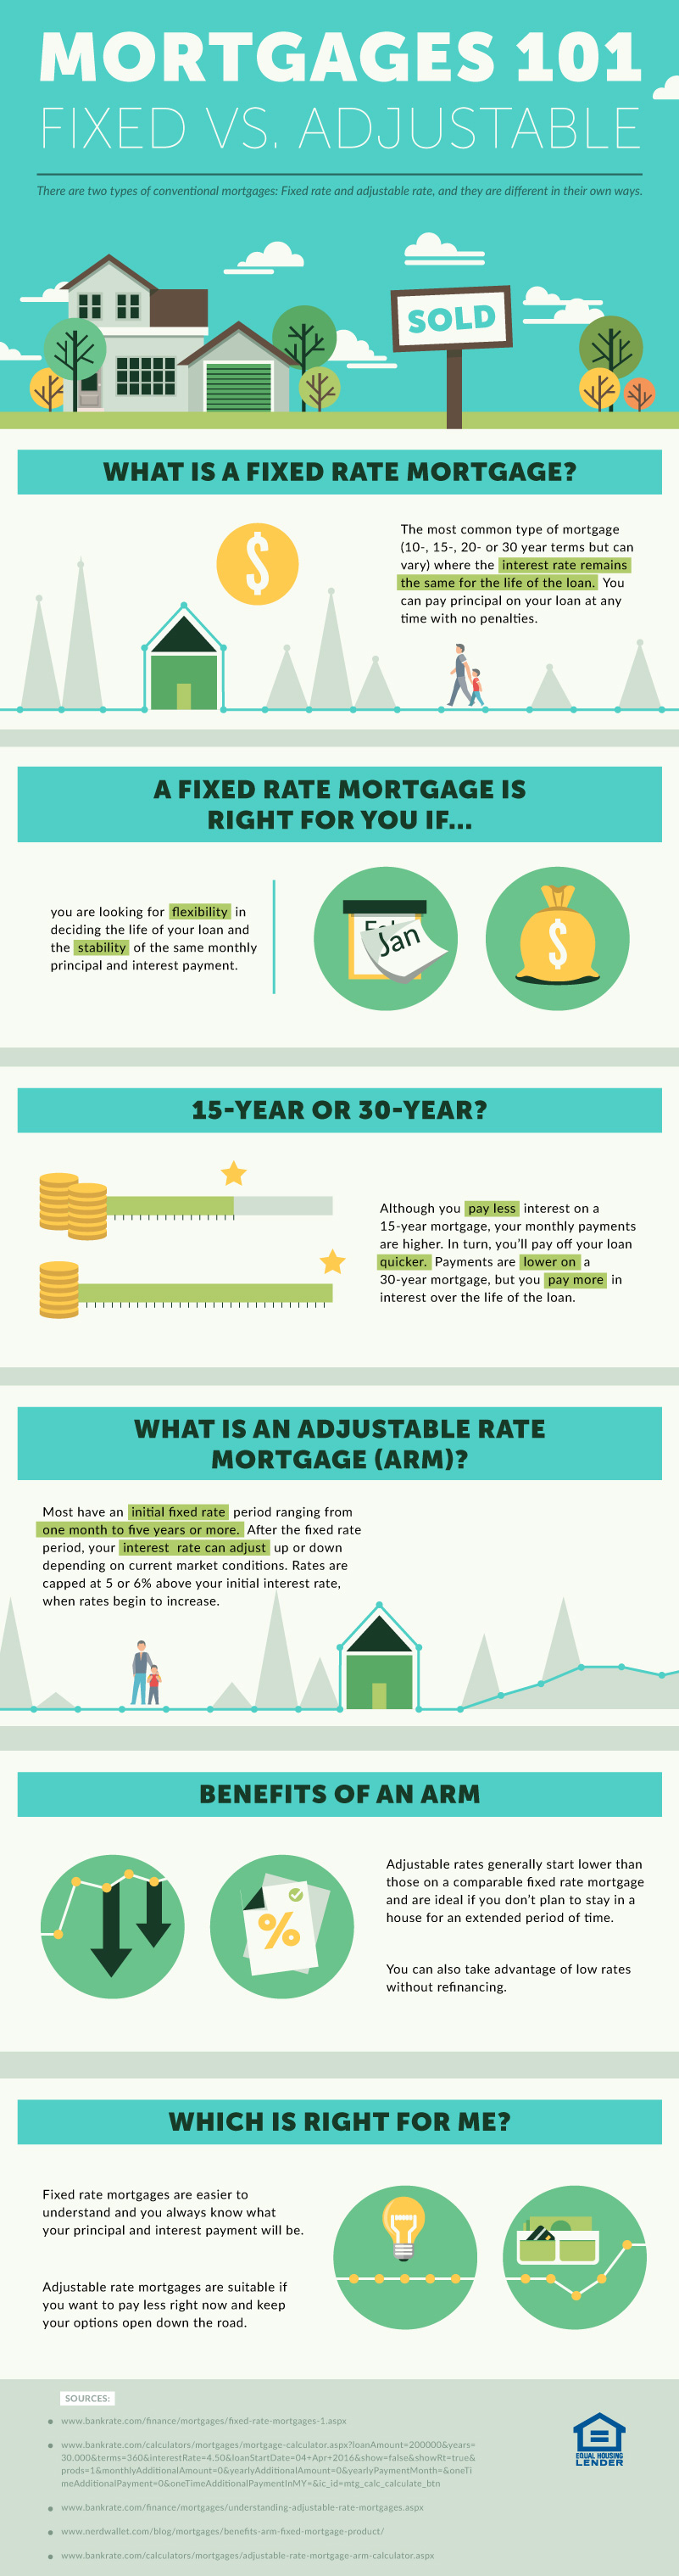 An infographic outlining everything you need to know about mortgages